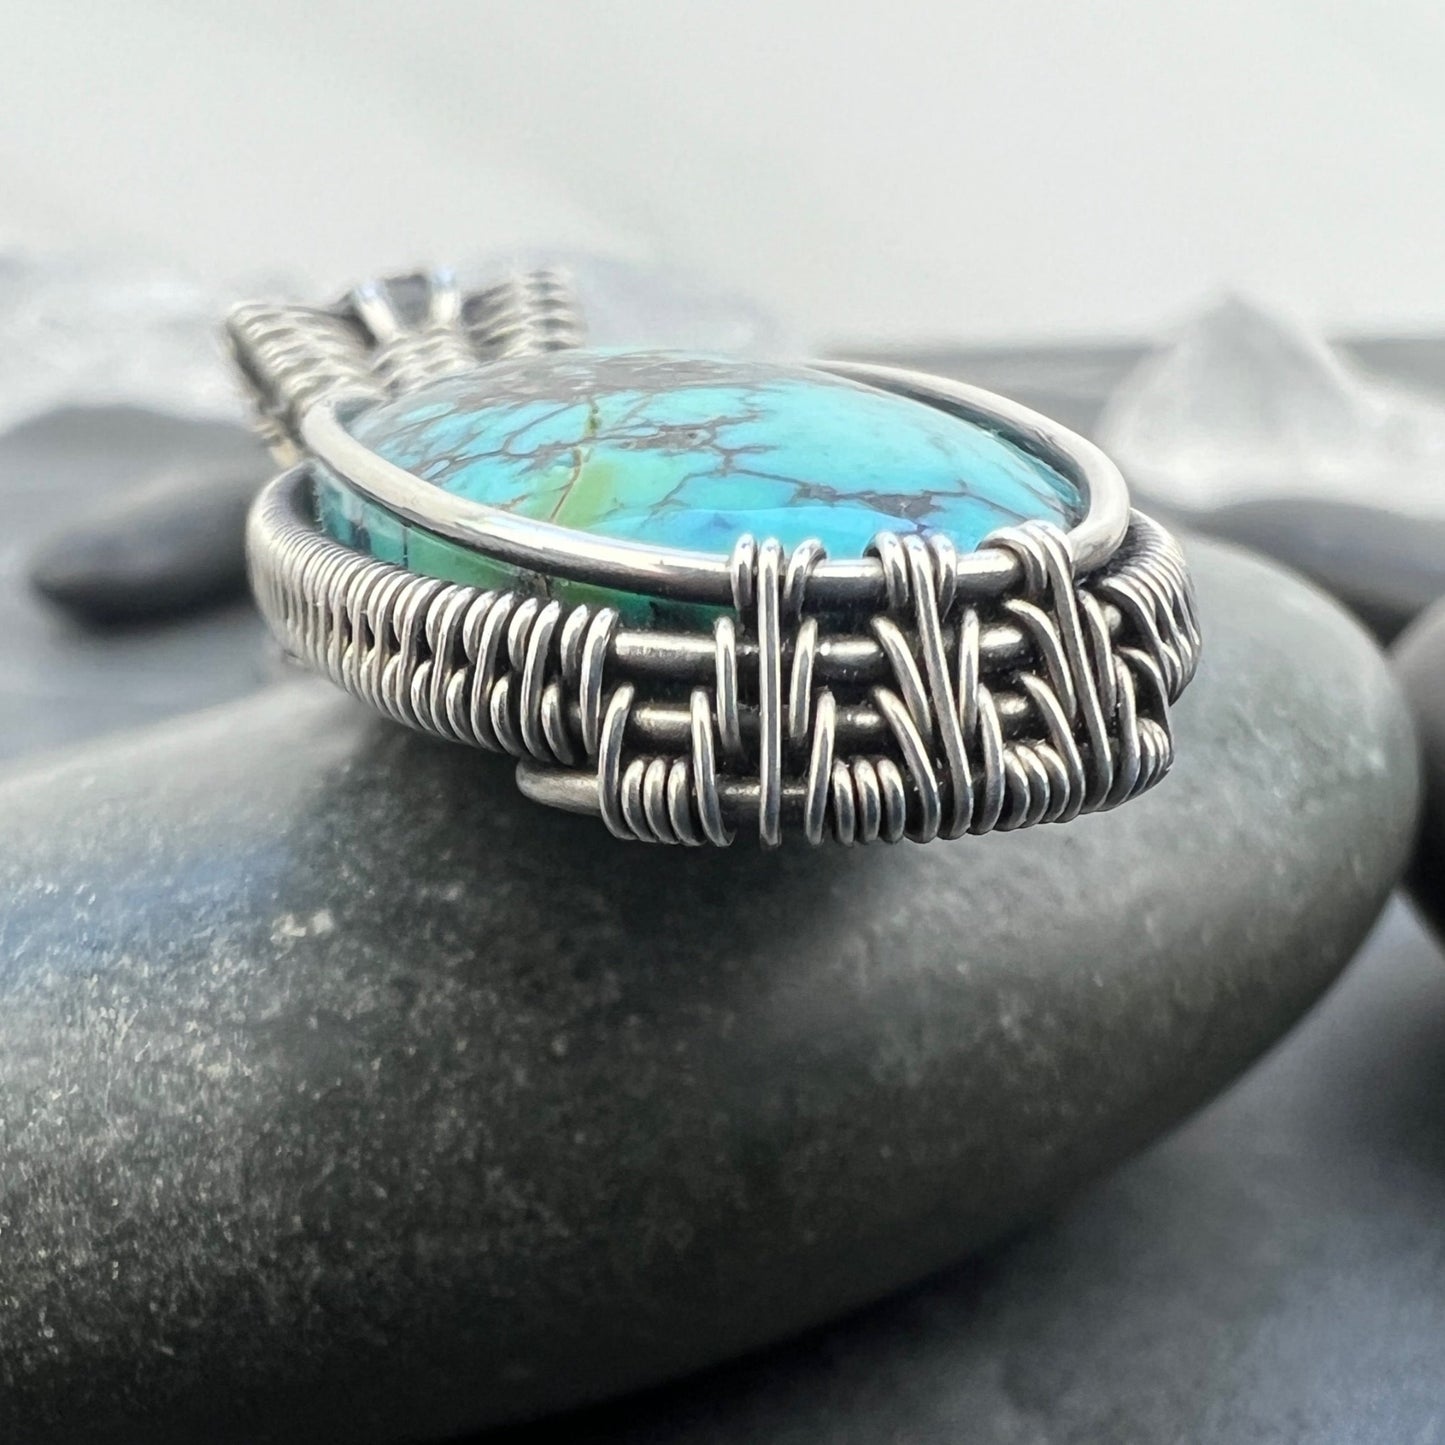 Silver Turquoise Pendant - Sterling Silver and Aquamarine Necklace